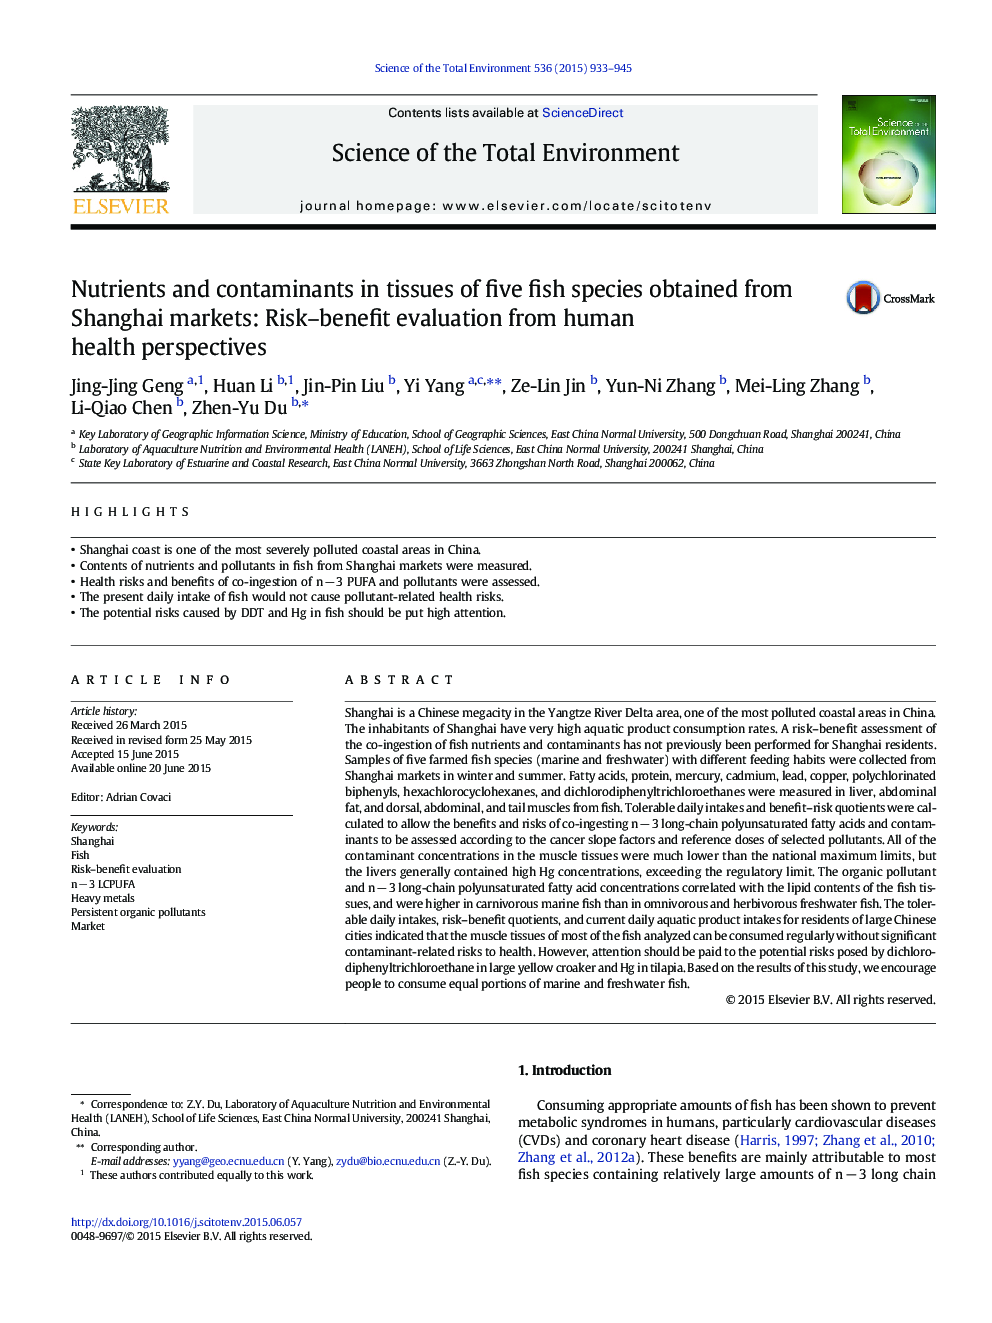 Nutrients and contaminants in tissues of five fish species obtained from Shanghai markets: Risk-benefit evaluation from human health perspectives